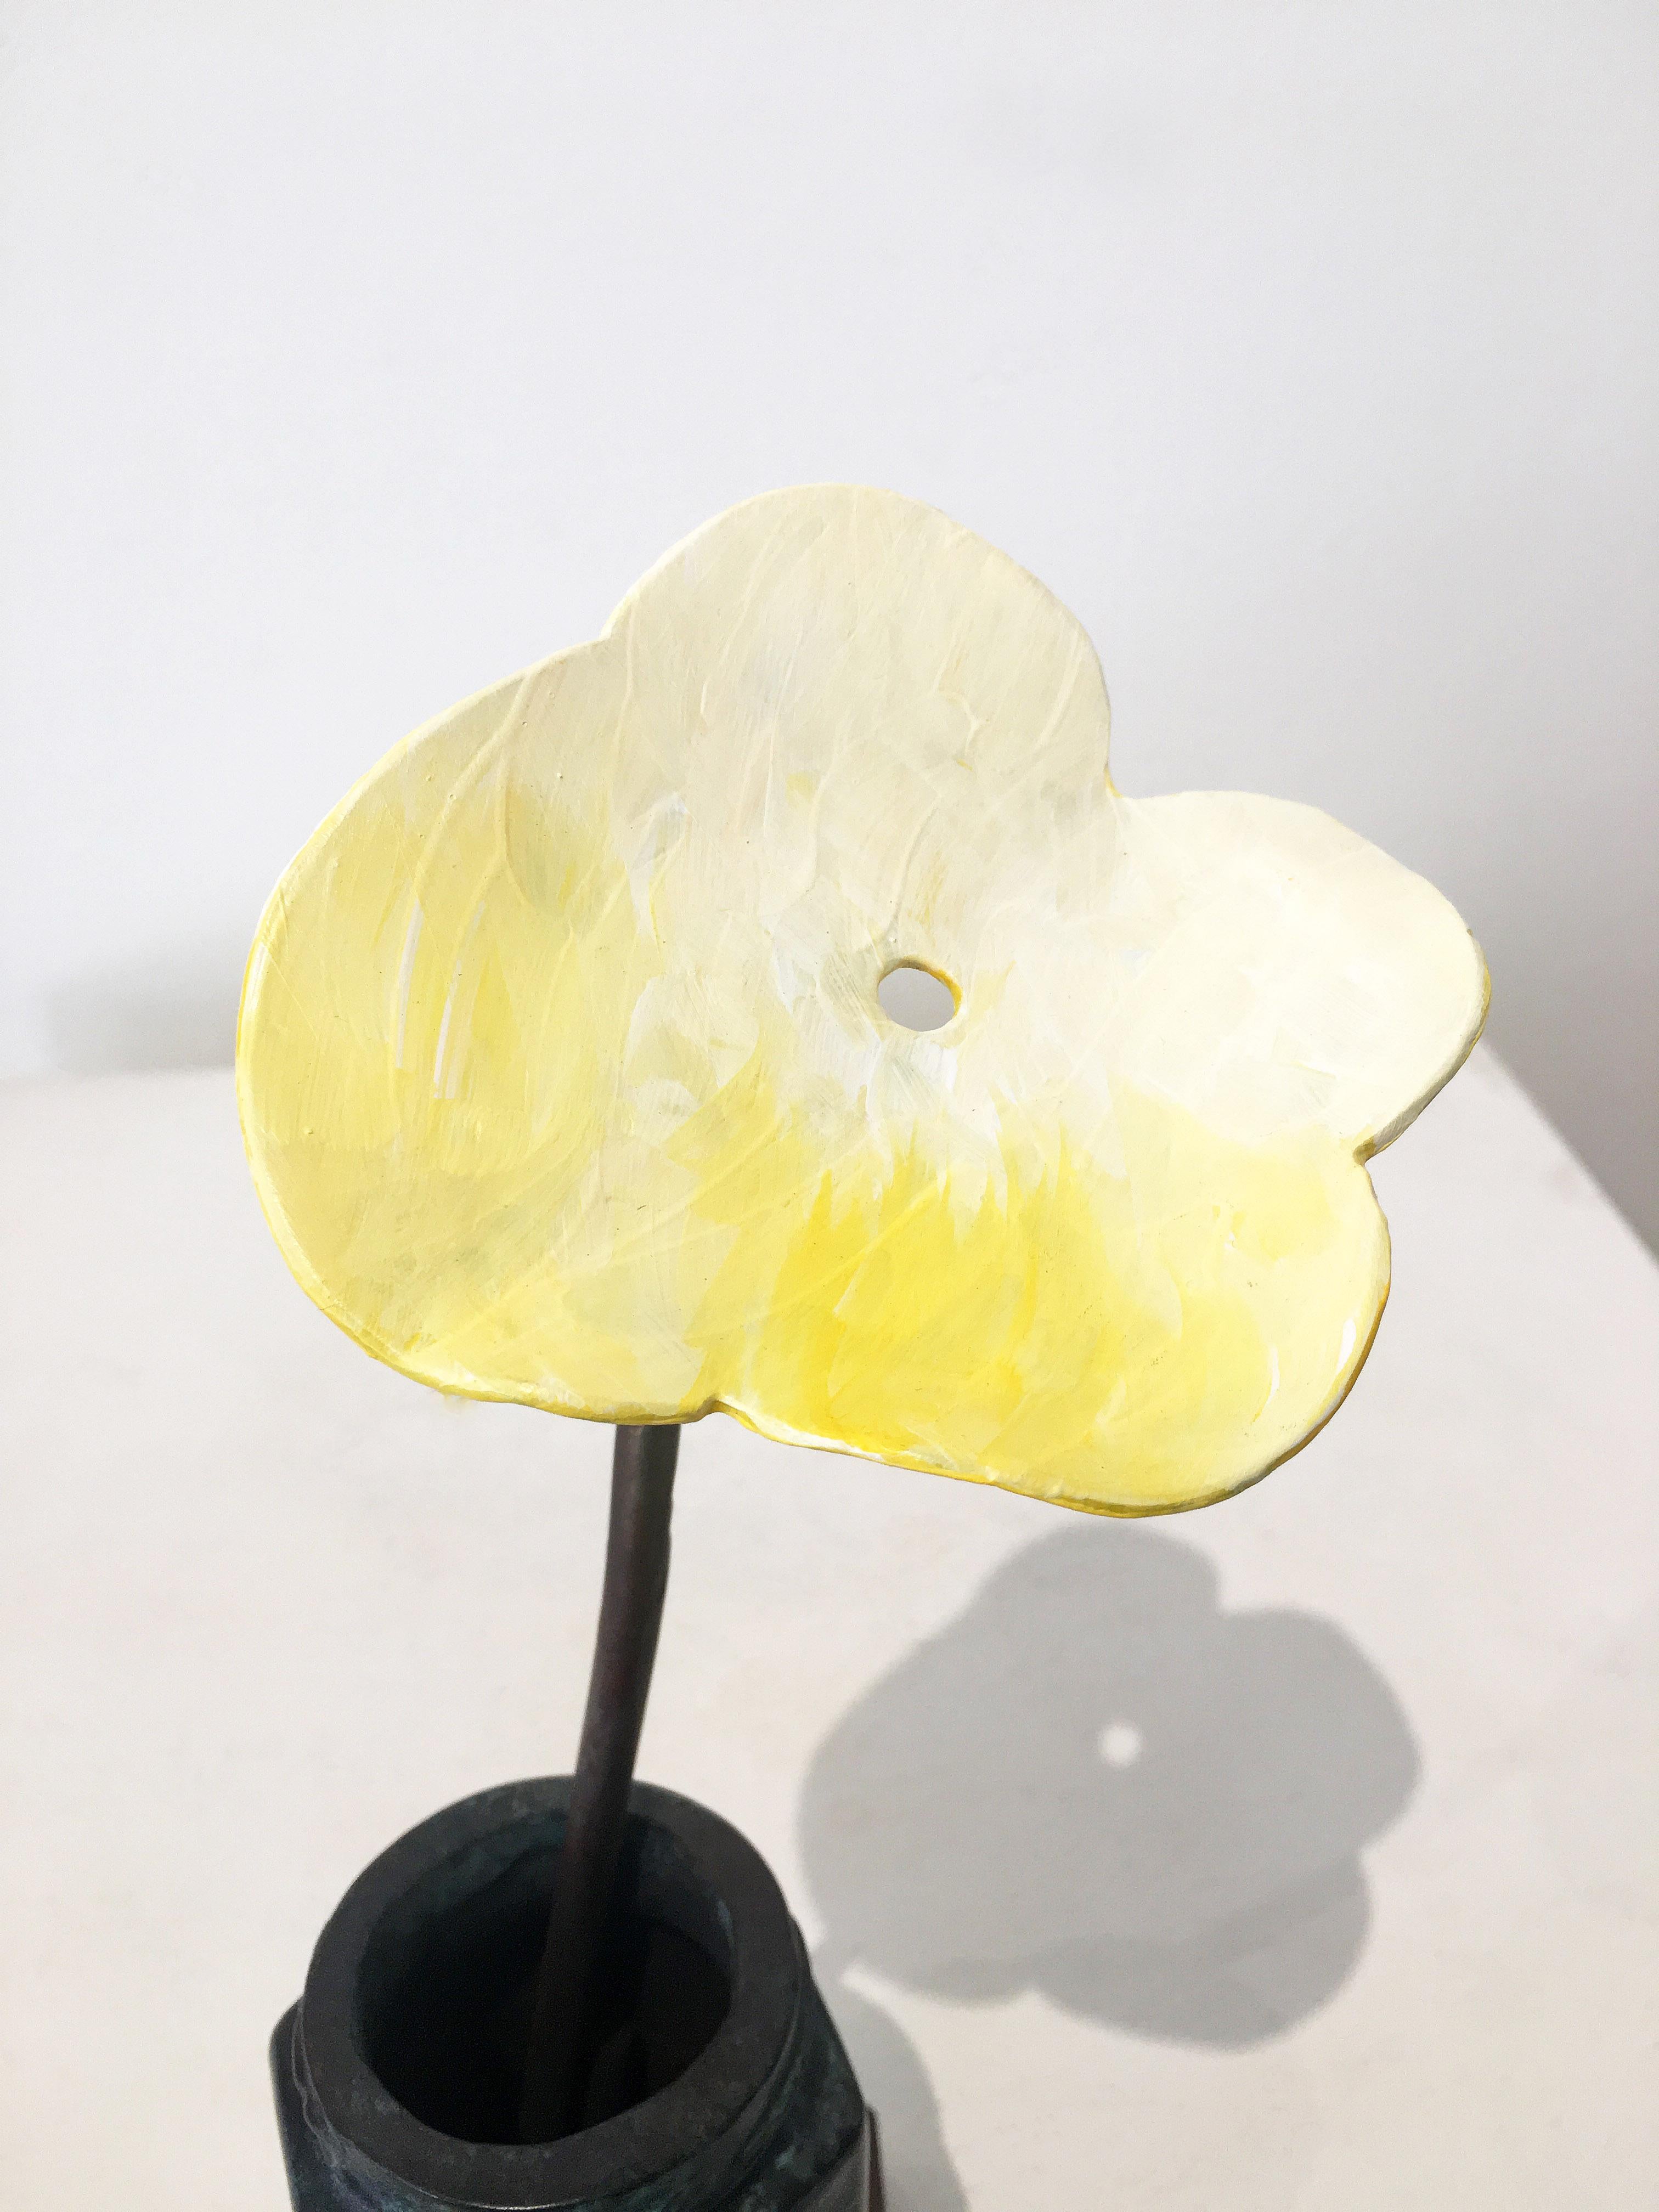 Yellow Poppy with Caper Bottle - Realist Sculpture by David Kimball Anderson